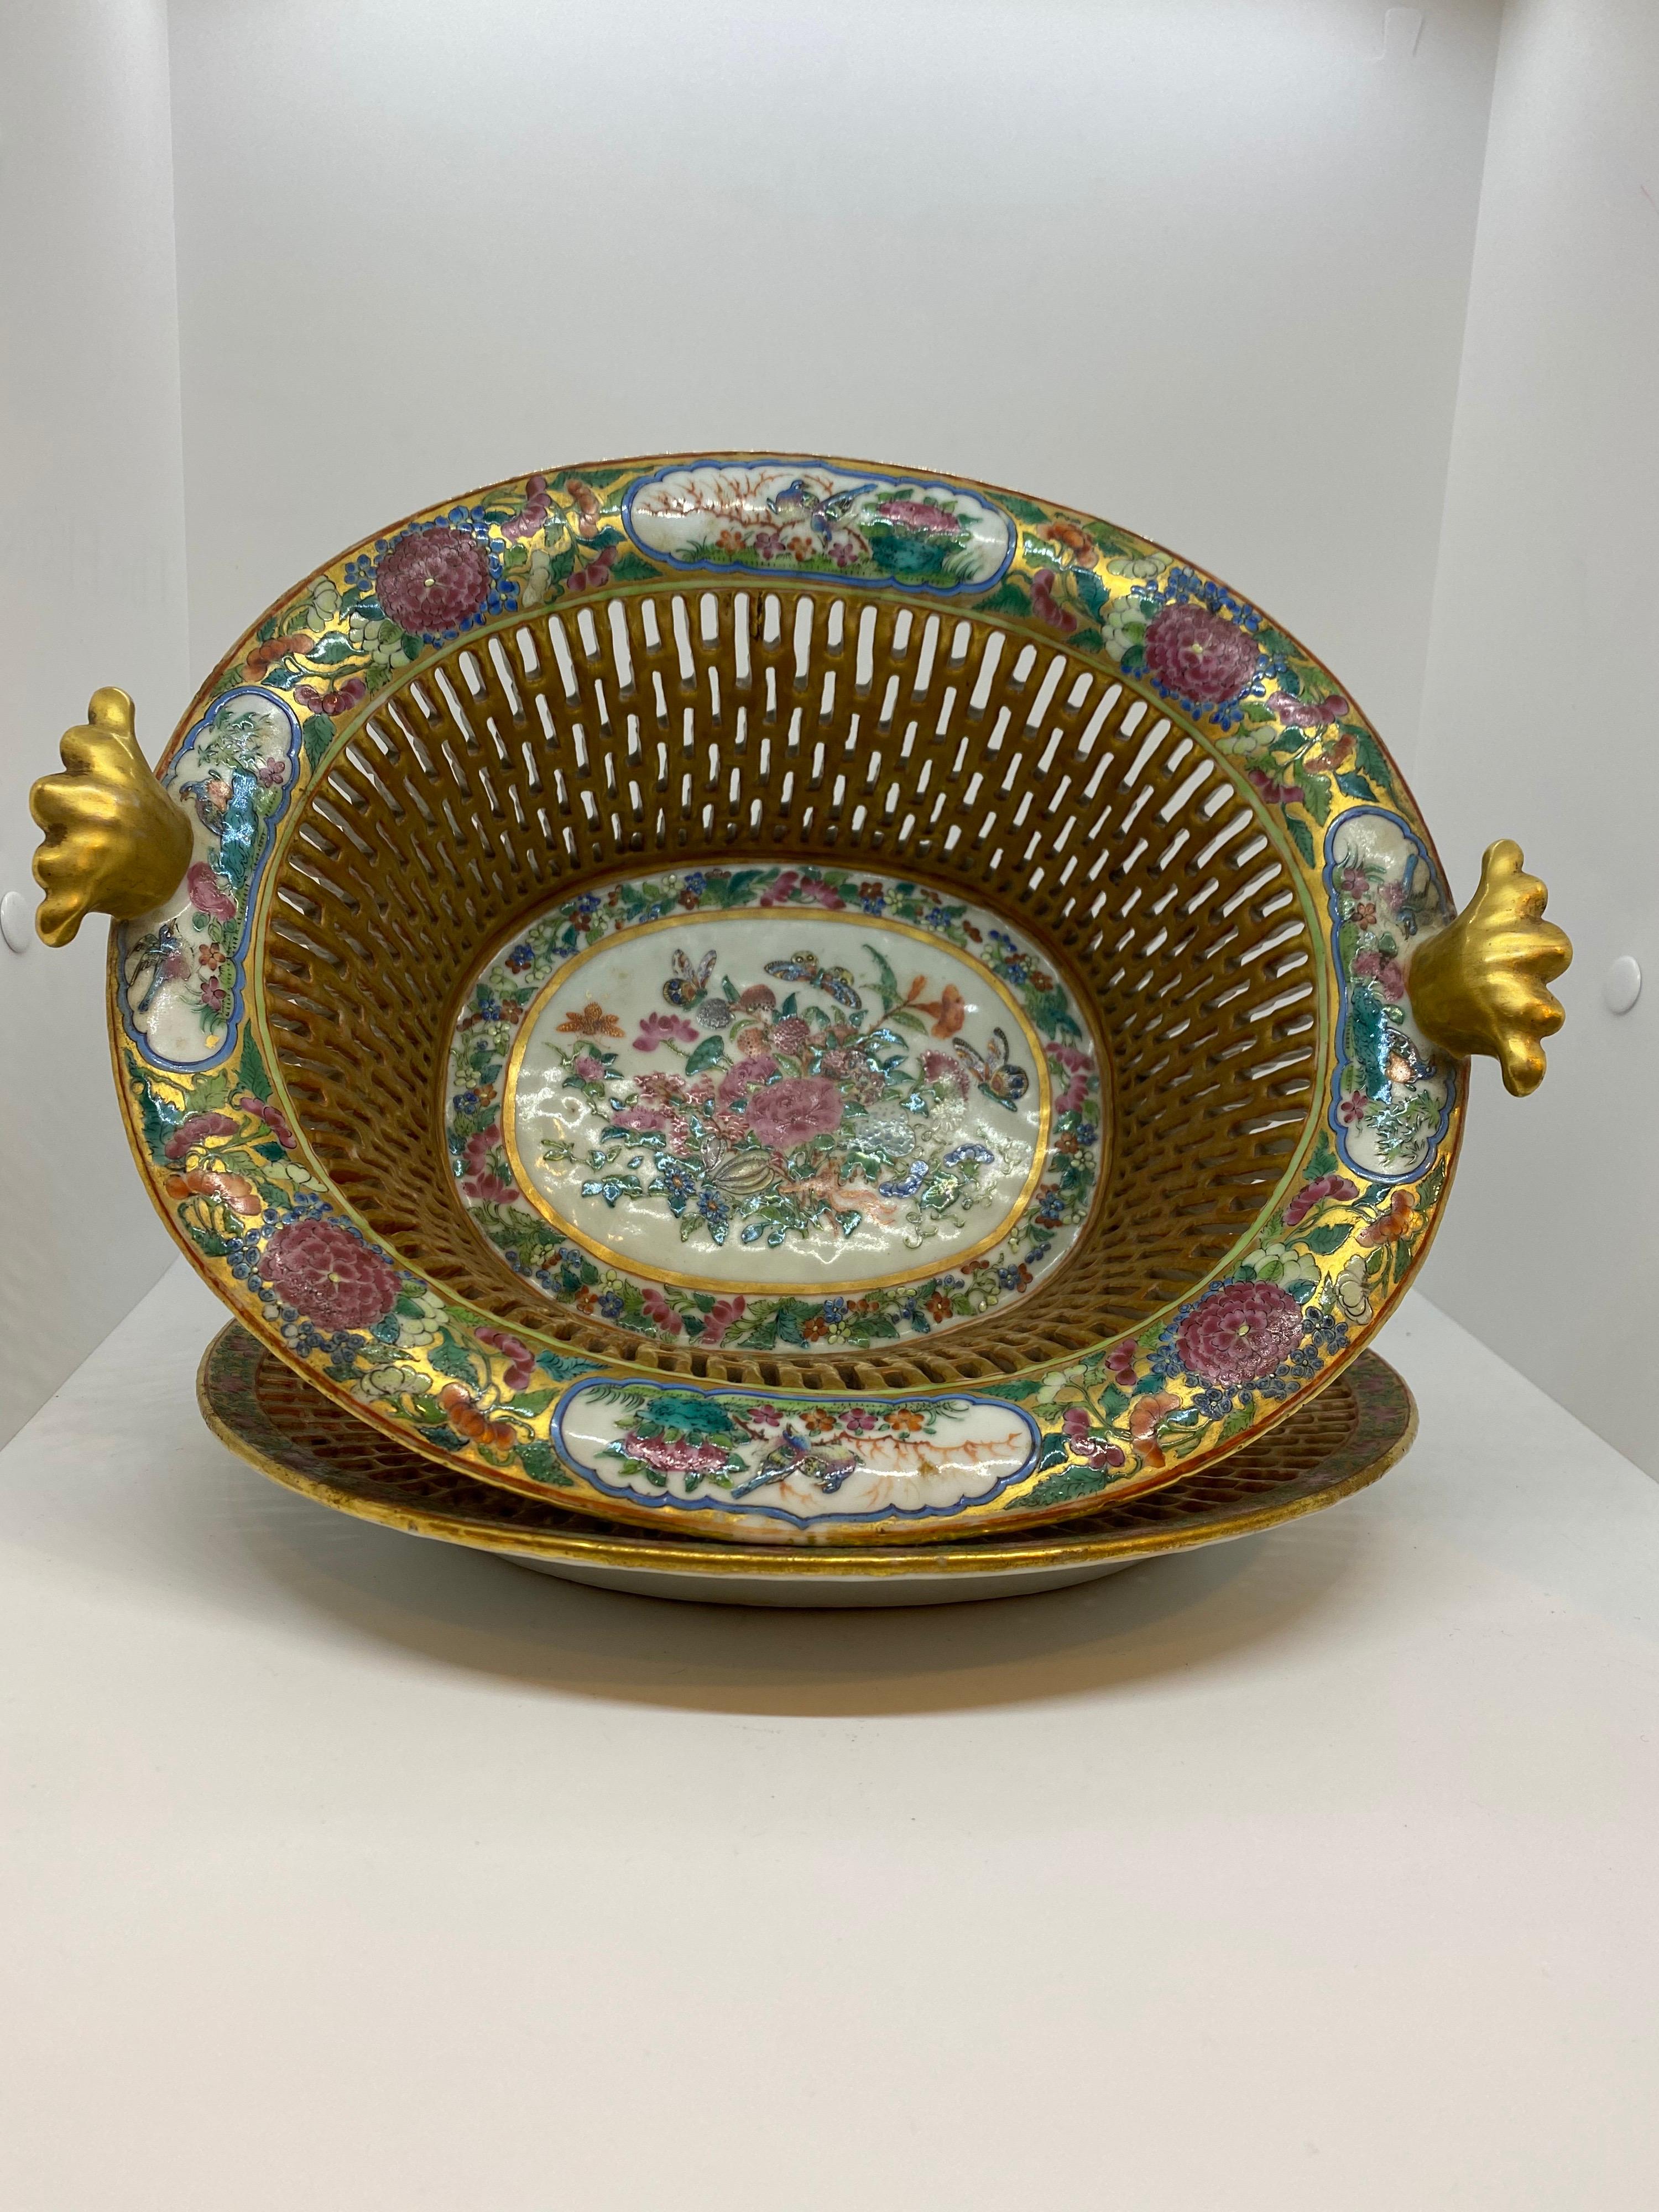 Rare Chinese Famille Rose chestnut basket with underplate. Basket is pierced and gilt all-over with decorated bottom and rims.